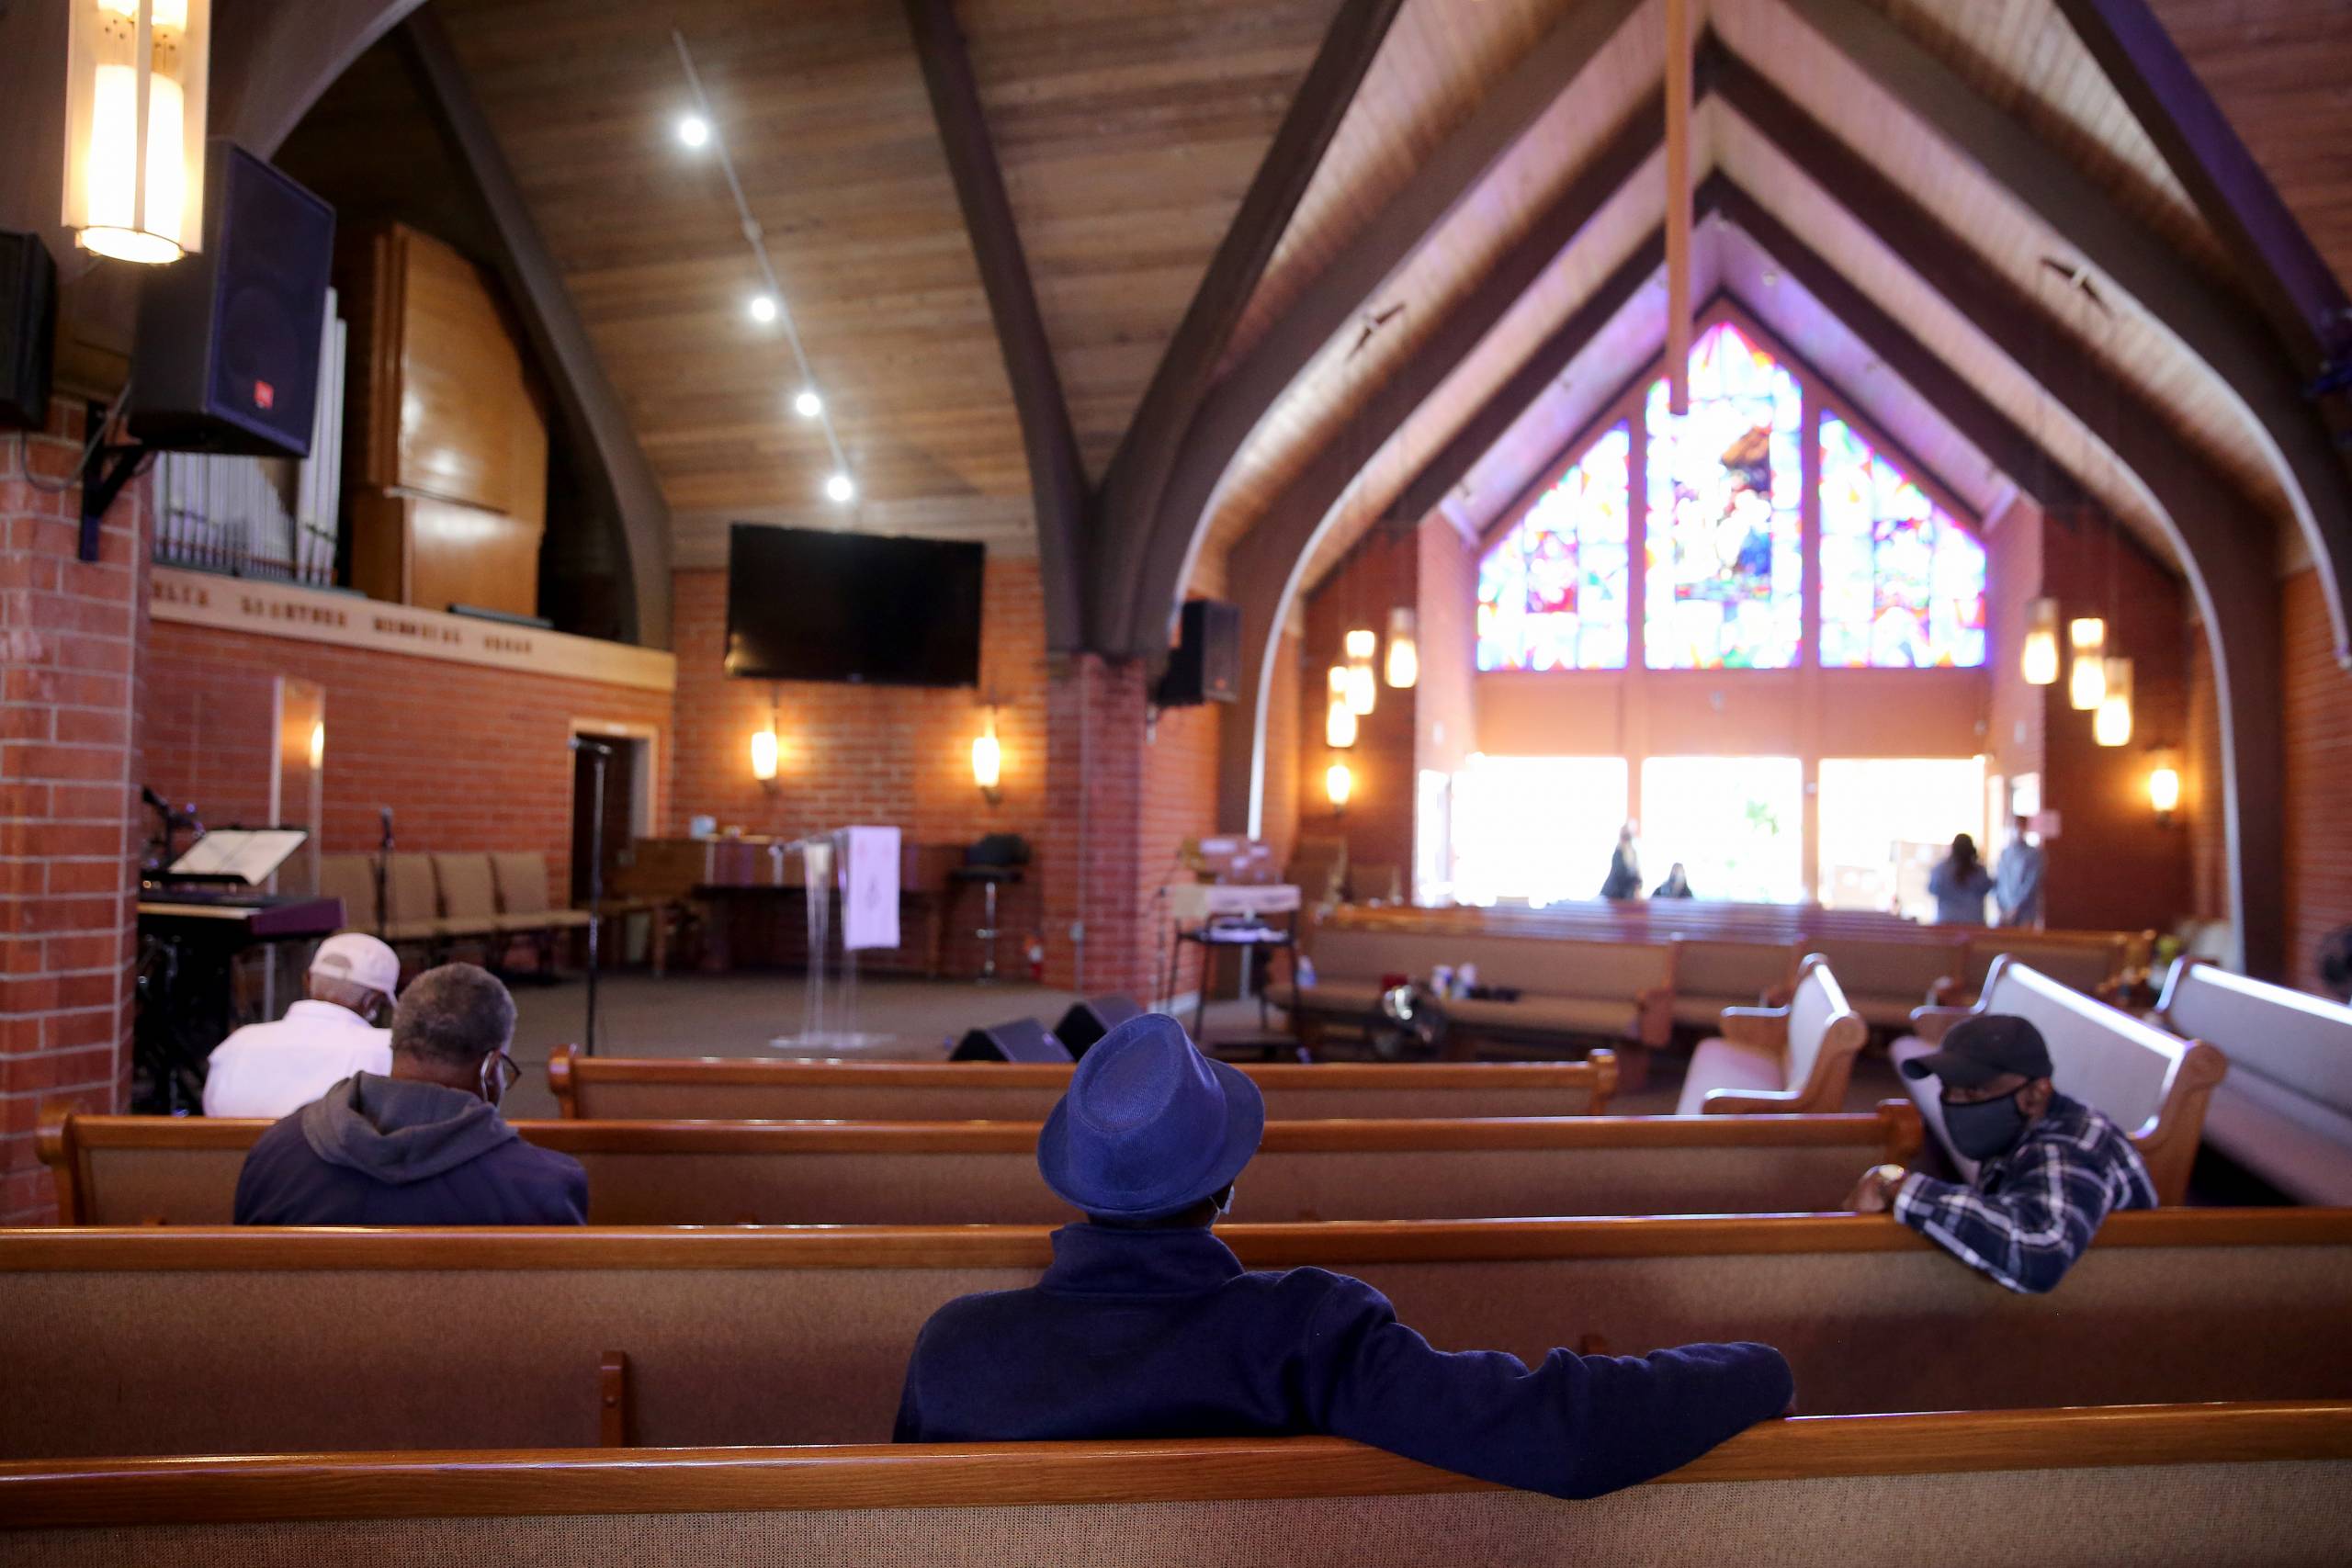 A handful of people sit at a distance from each other in church pews backed by a brightly lit window.